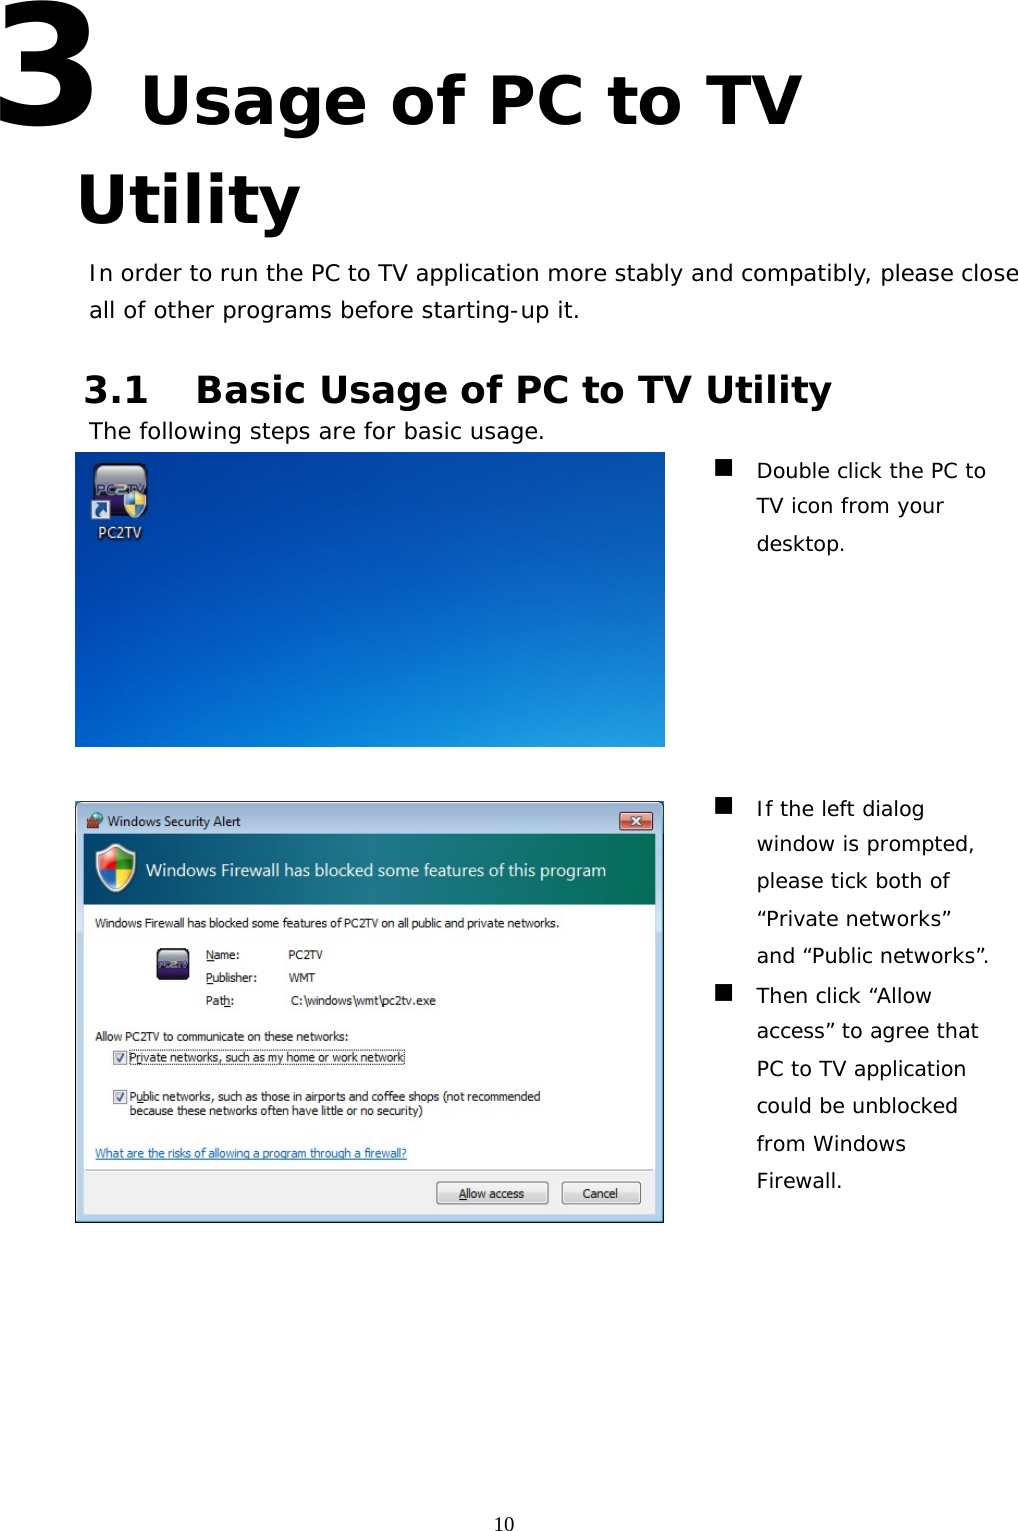   103 Usage of PC to TV Utility In order to run the PC to TV application more stably and compatibly, please close all of other programs before starting-up it.  3.1 Basic Usage of PC to TV Utility The following steps are for basic usage.    Double click the PC to TV icon from your desktop.    If the left dialog window is prompted, please tick both of “Private networks” and “Public networks”.  Then click “Allow access” to agree that PC to TV application could be unblocked from Windows Firewall. 